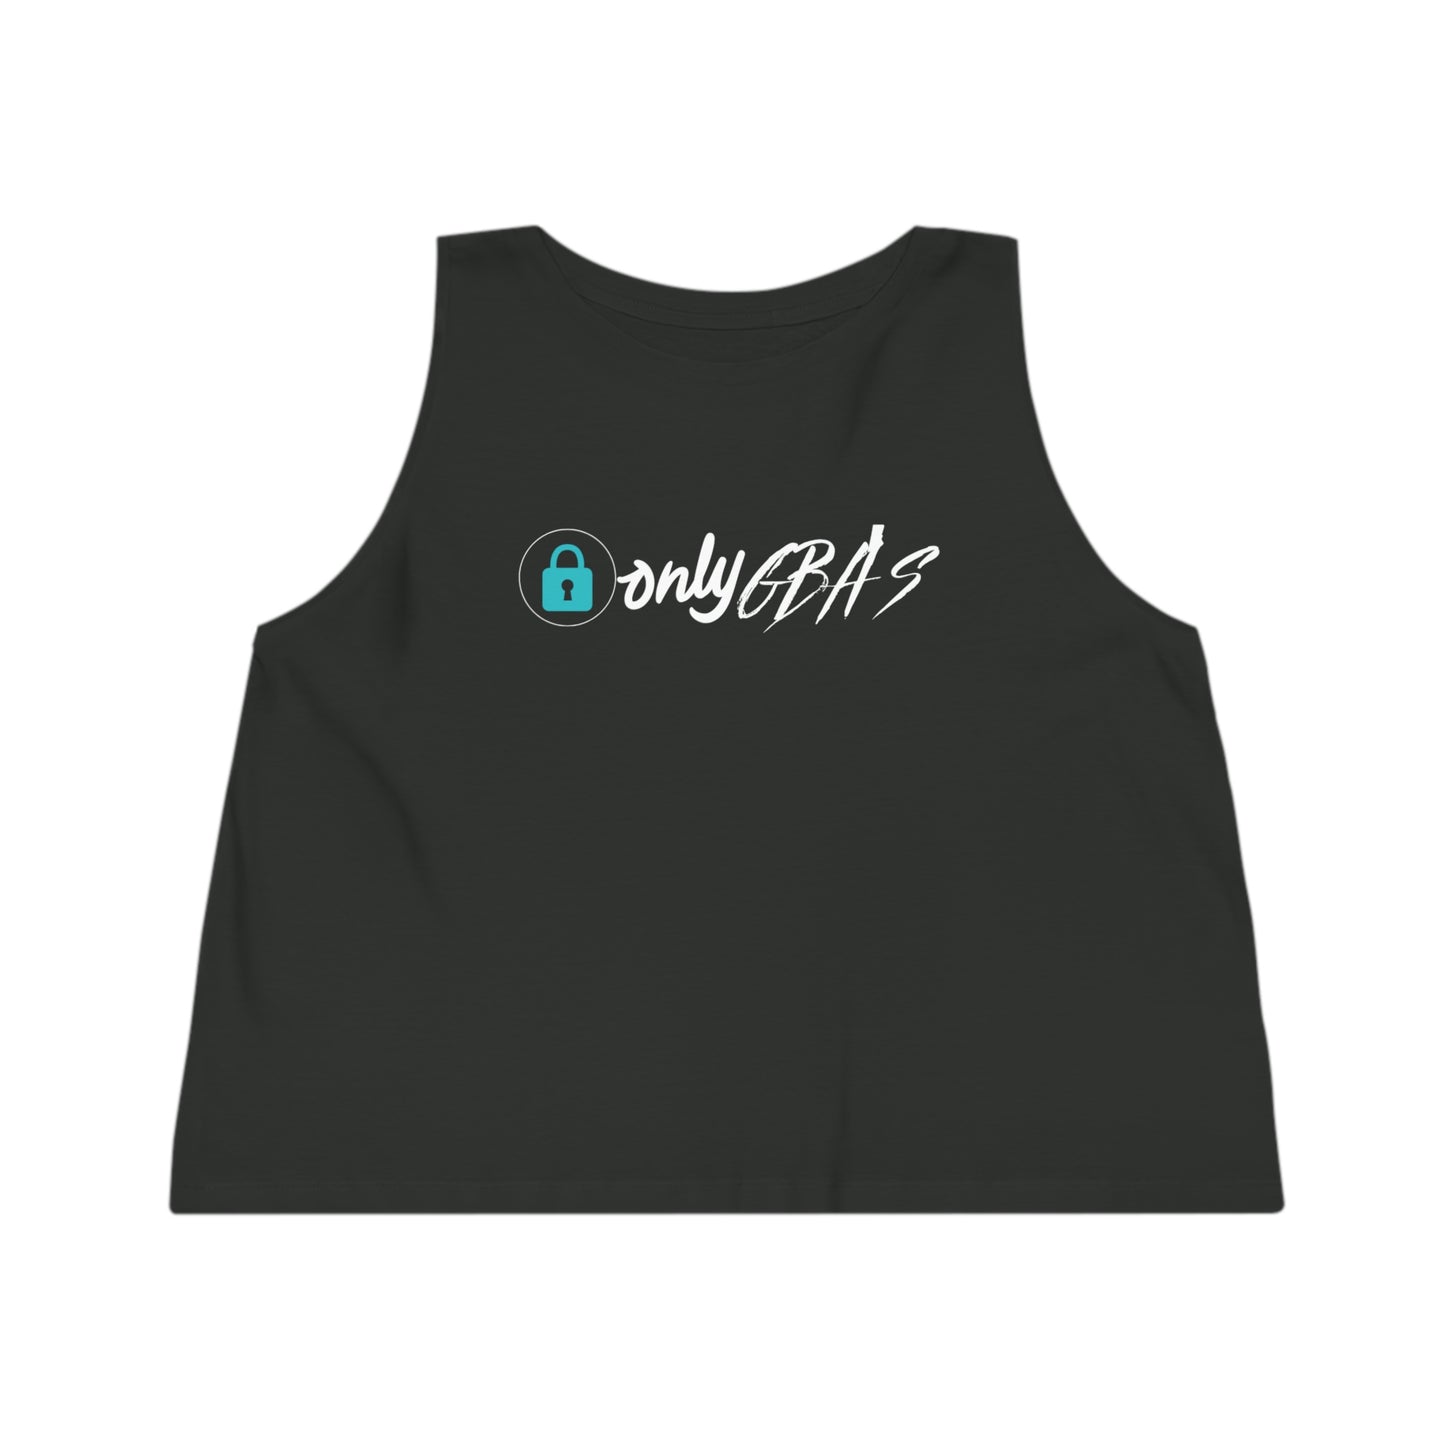 Only GBA's Crop Tank